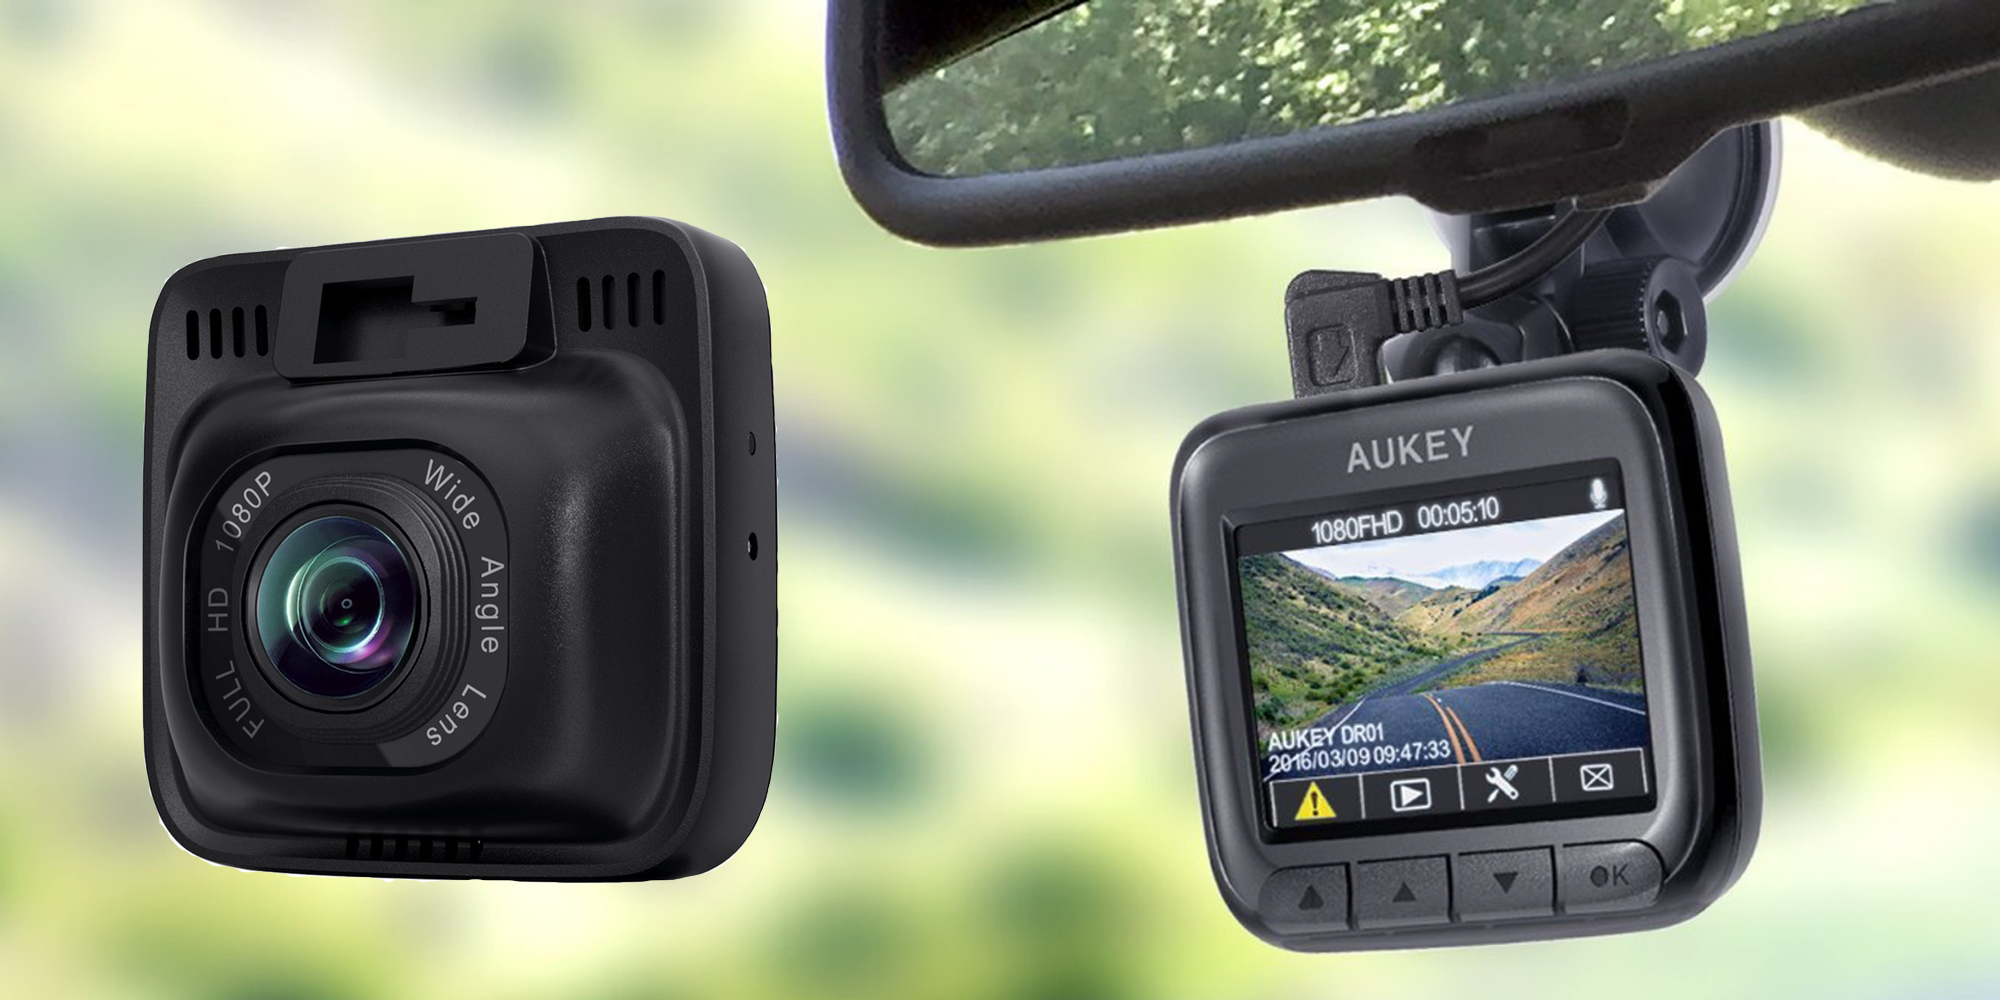 uitslag neutrale lamp Aukey 1080p Sony Exmor Dashcam with Night Vision: $50 shipped (Reg. $70)